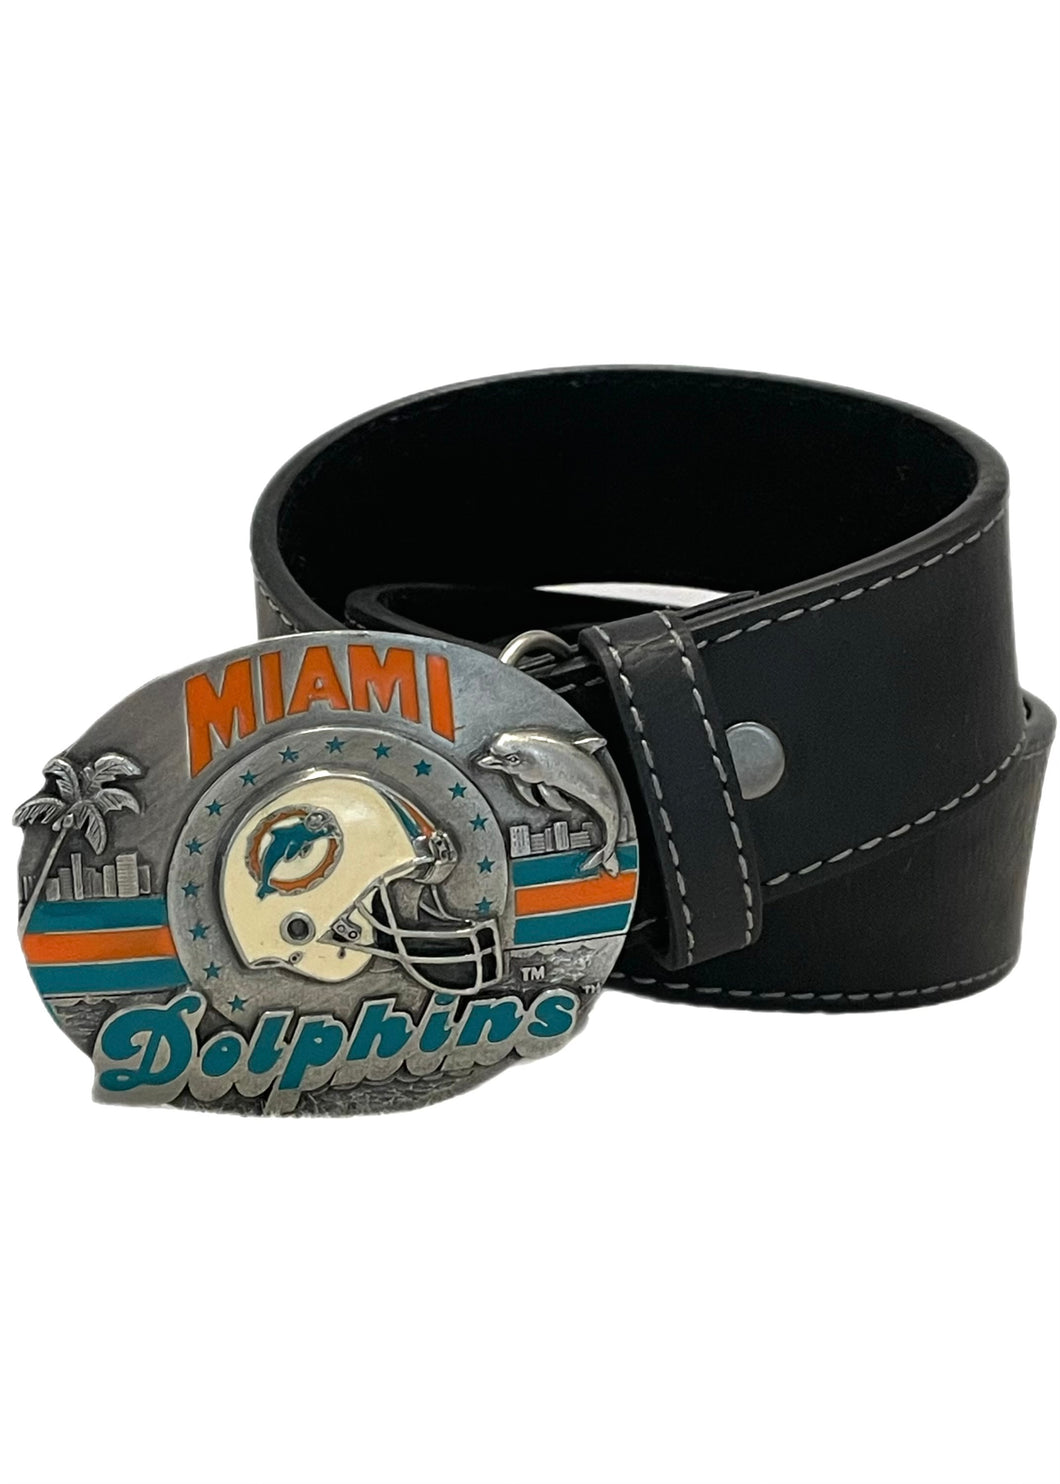 Miami Dolphins, NFL Vintage 1993 Belt Buckle with New Soft Leather Strap